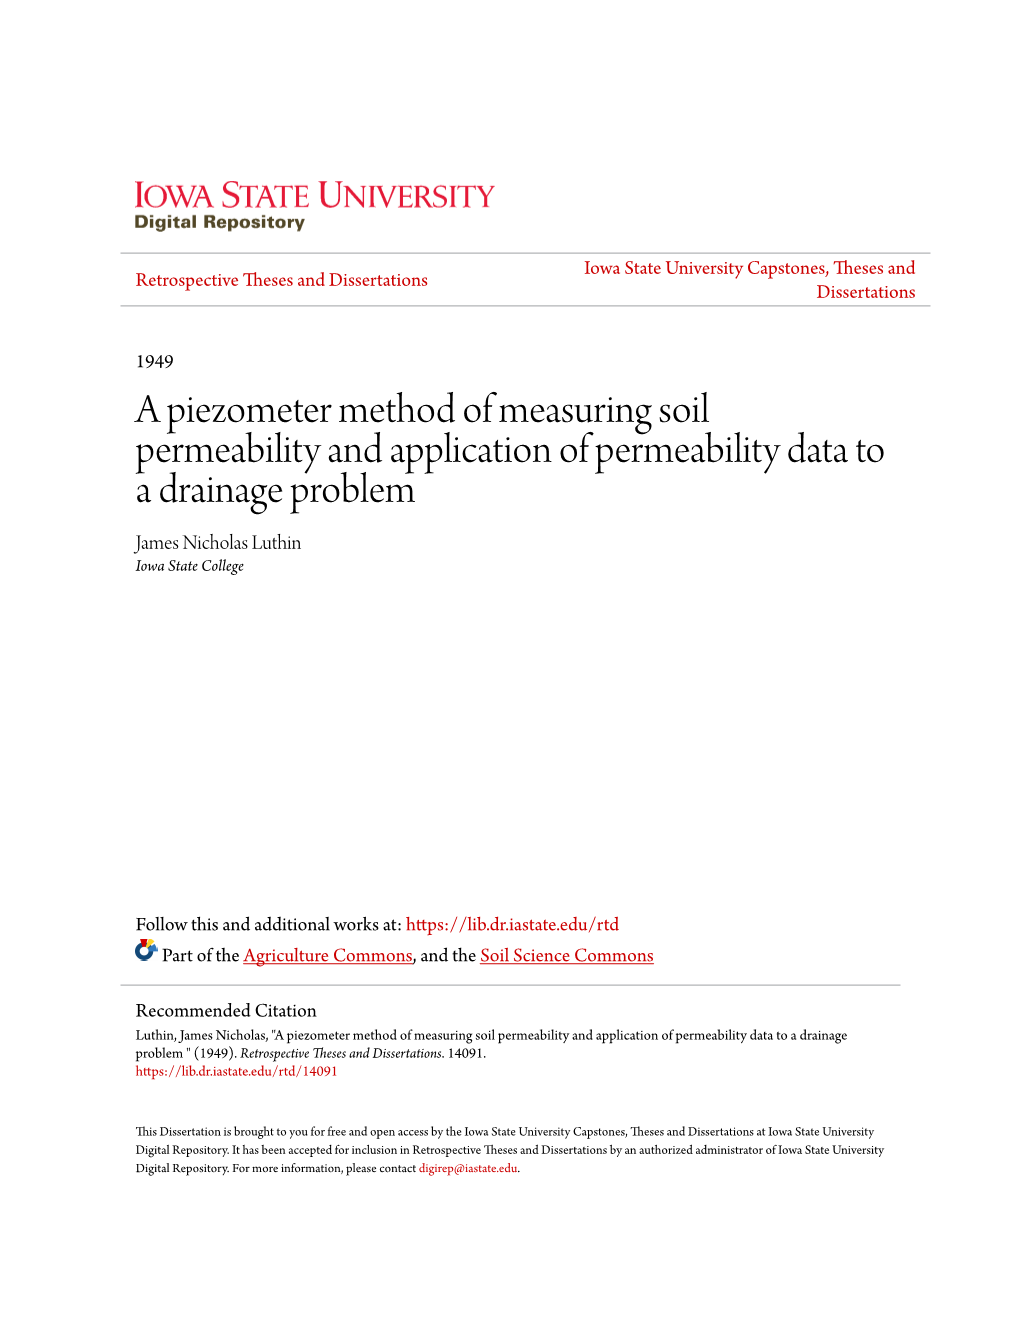 A Piezometer Method of Measuring Soil Permeability and Application of Permeability Data to a Drainage Problem James Nicholas Luthin Iowa State College